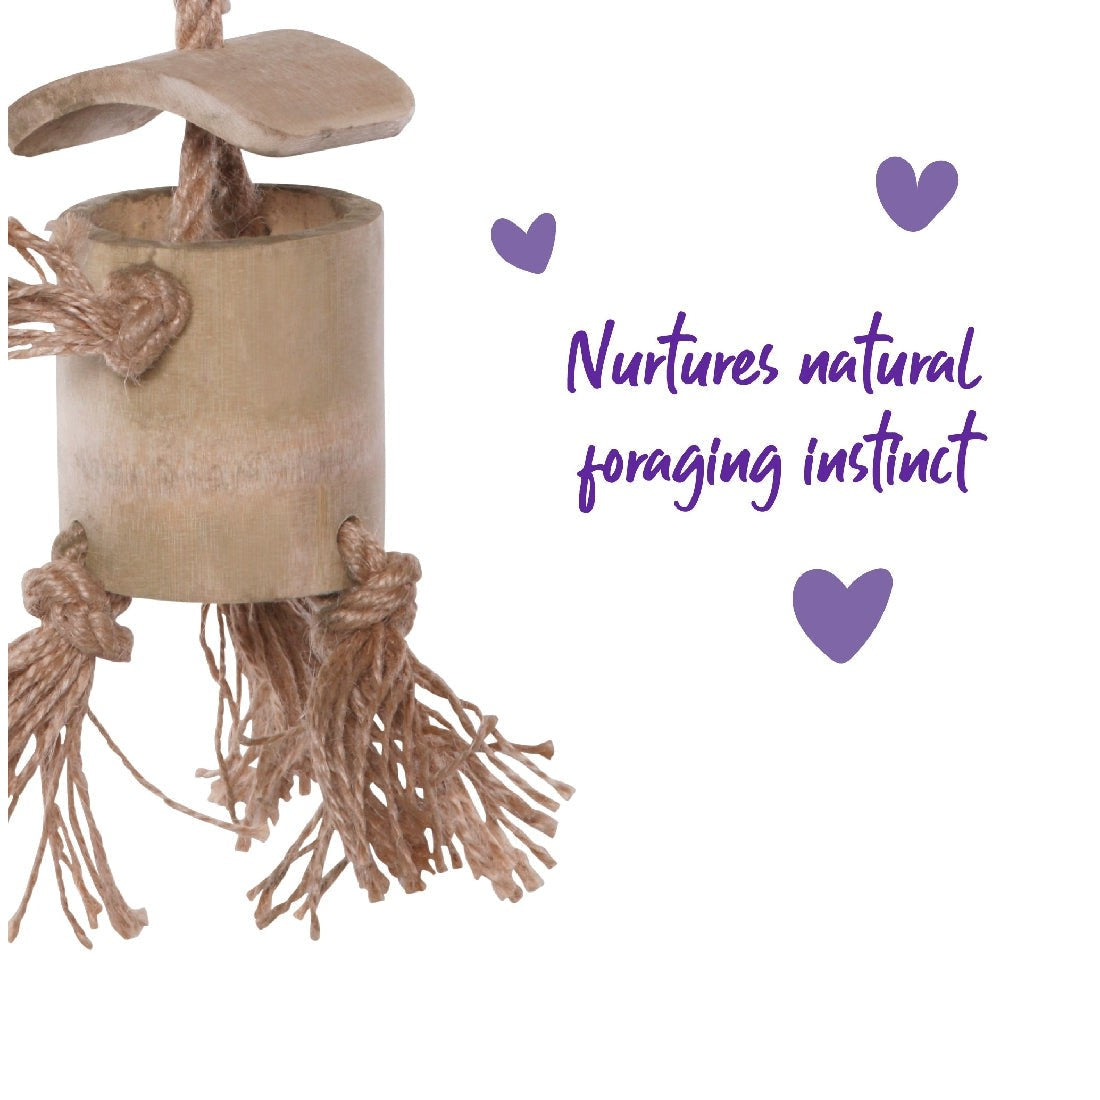 A wooden bird toy with ropes to nurture foraging instincts.